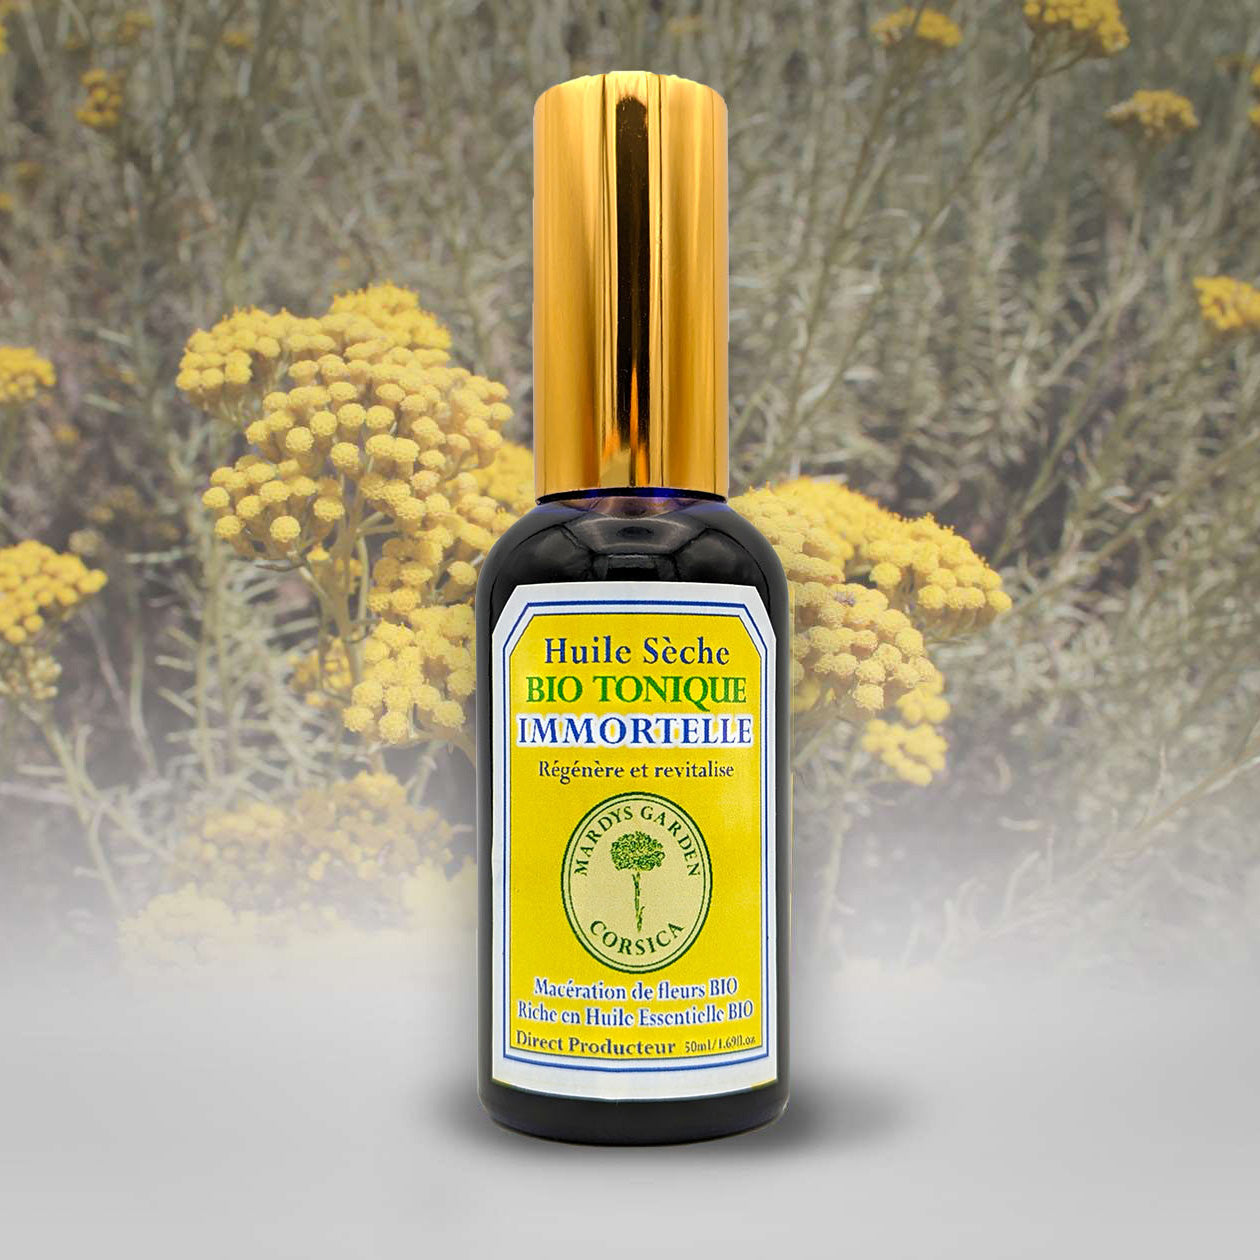 Immortelle Dry Oil 50ml. Revives and Revitalizes. Multifunction for hair, face and body. Rich in Organic Essential Oil of Helichrysum Italicum and Myrtus Communis